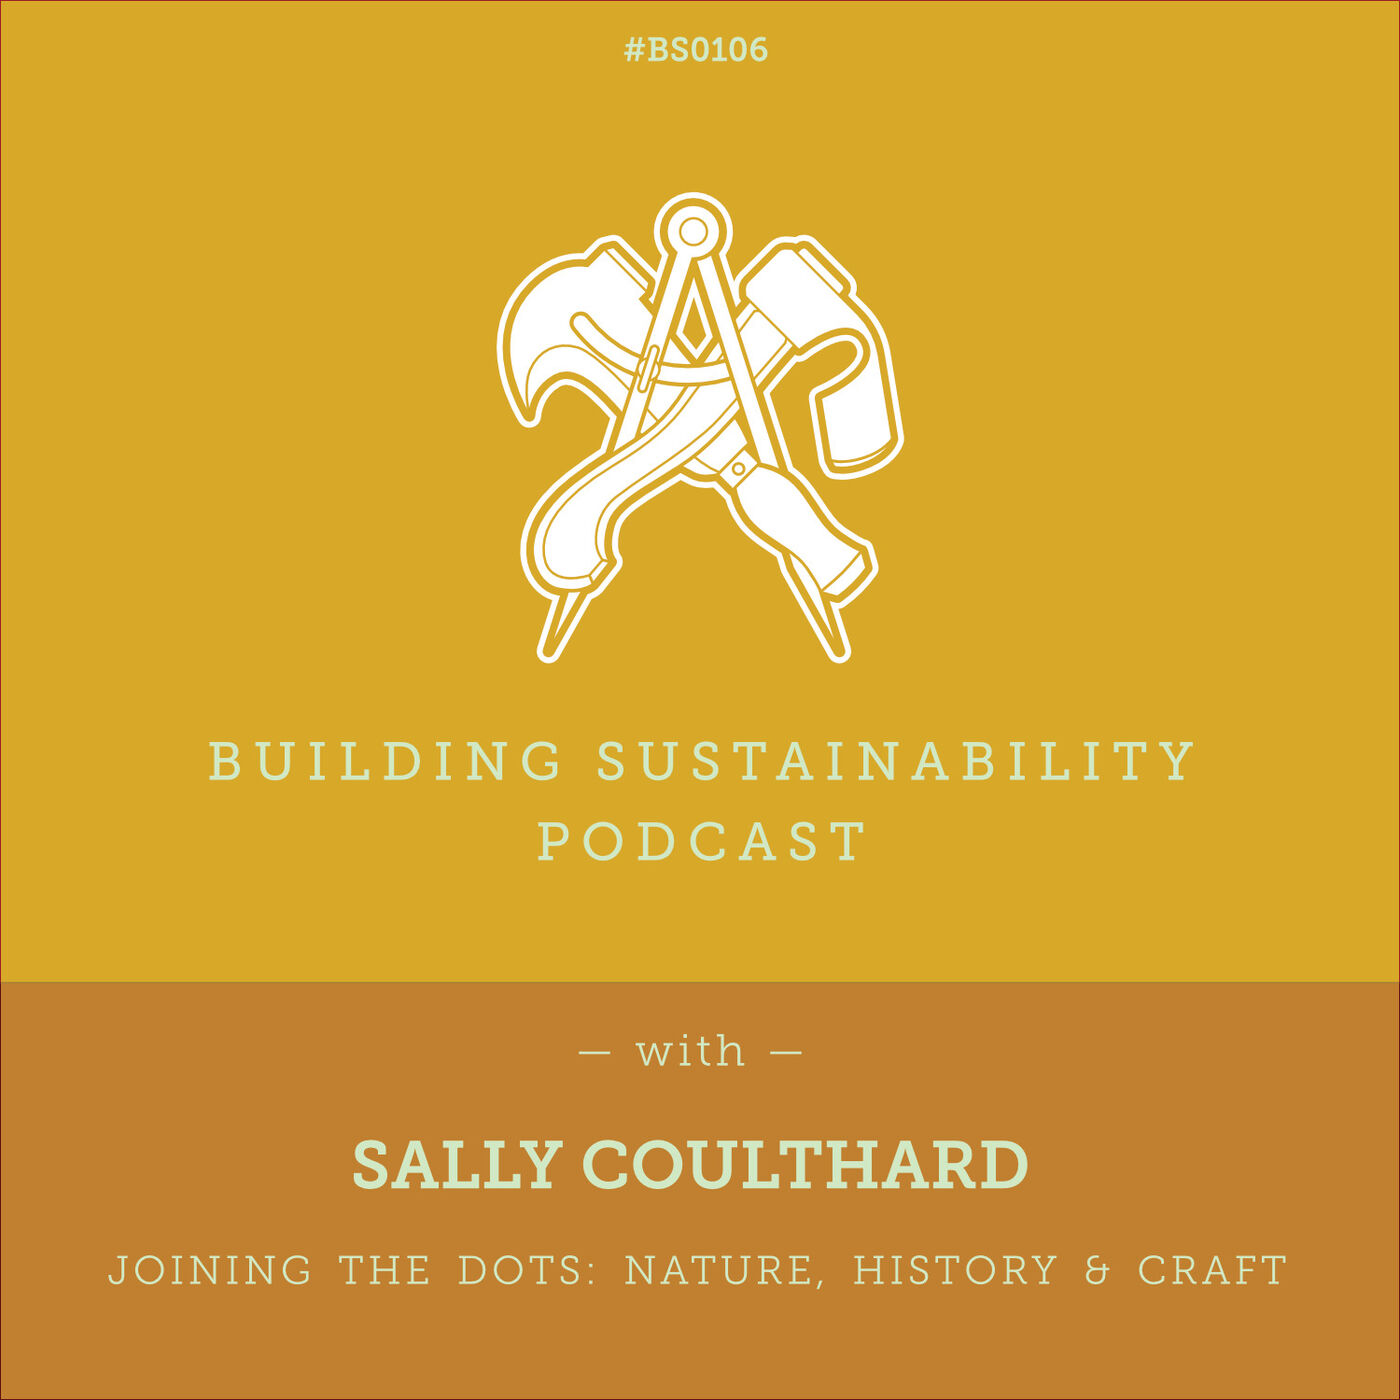 Joining the Dots: Nature, History & Craft [Pt2] - Sally Coulthard - BS106